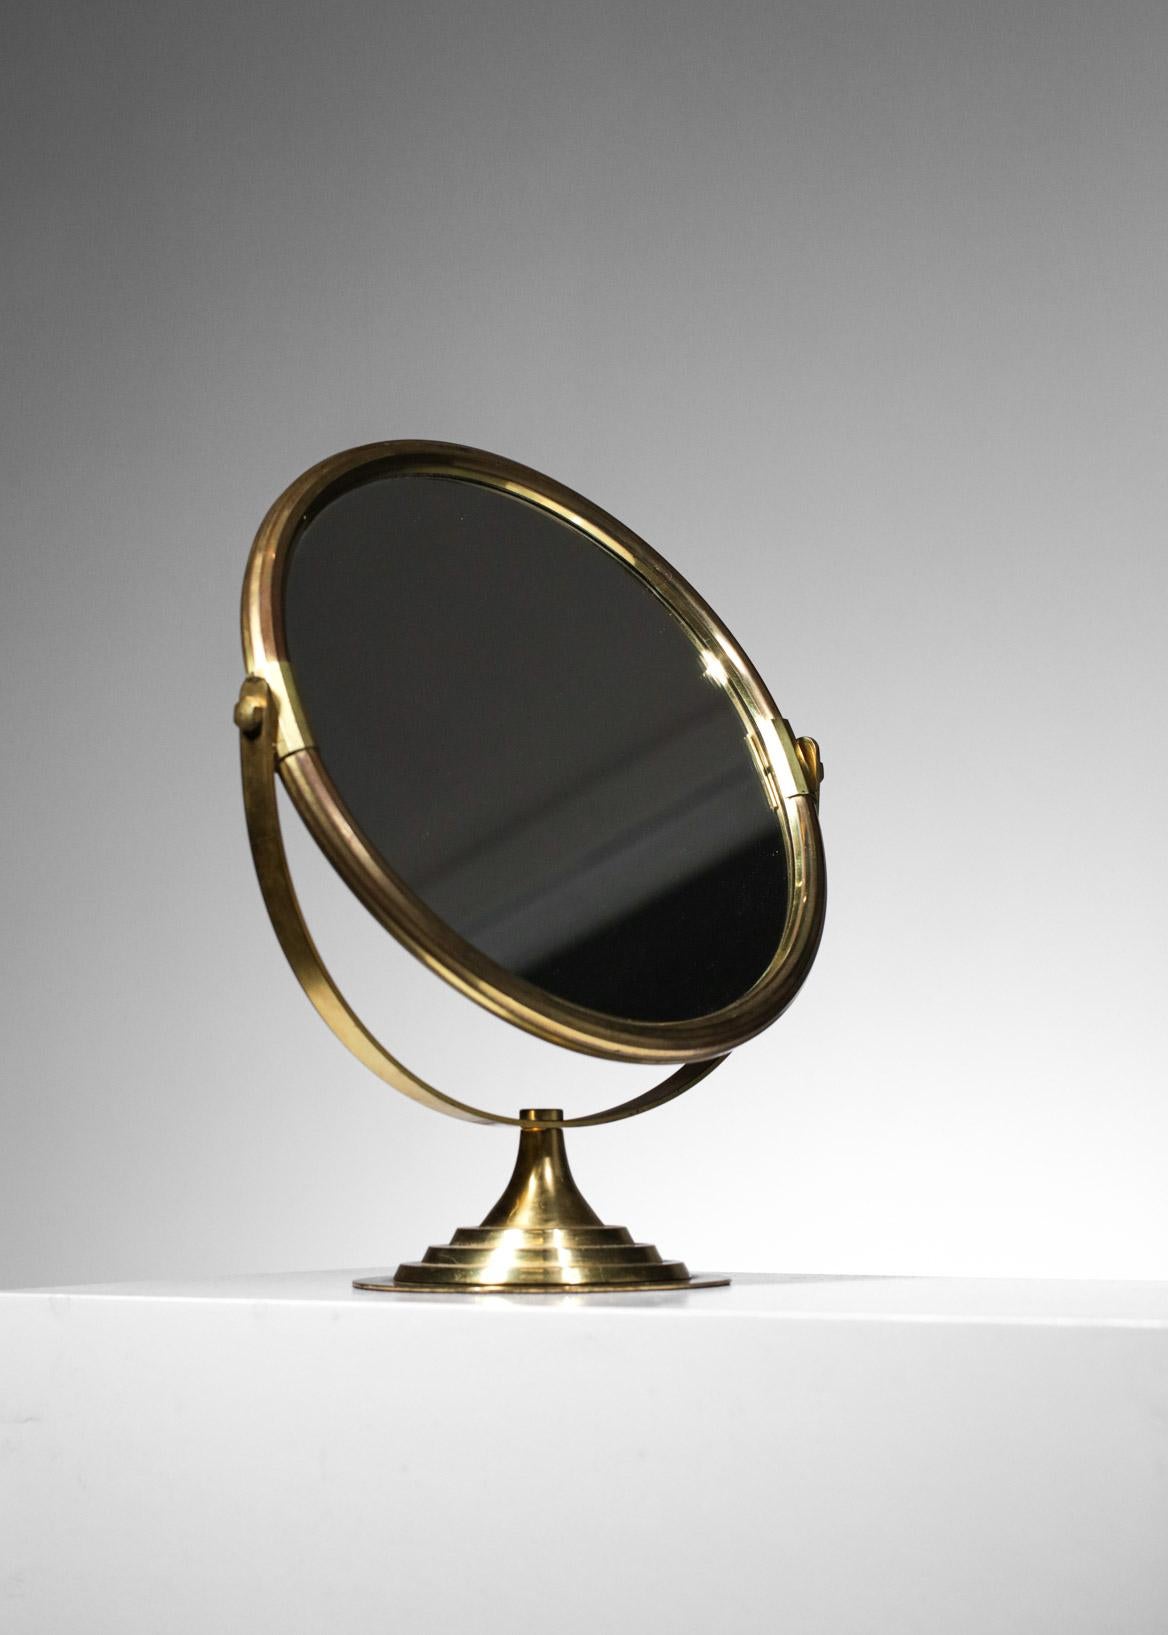 Swedish table mirror from the 60's. Solid brass structure, possibility to rotate it with a mirror on both sides. Sober and clean design typical of Scandinavian work from this era. Excellent vintage condition, slight traces of time and use (see